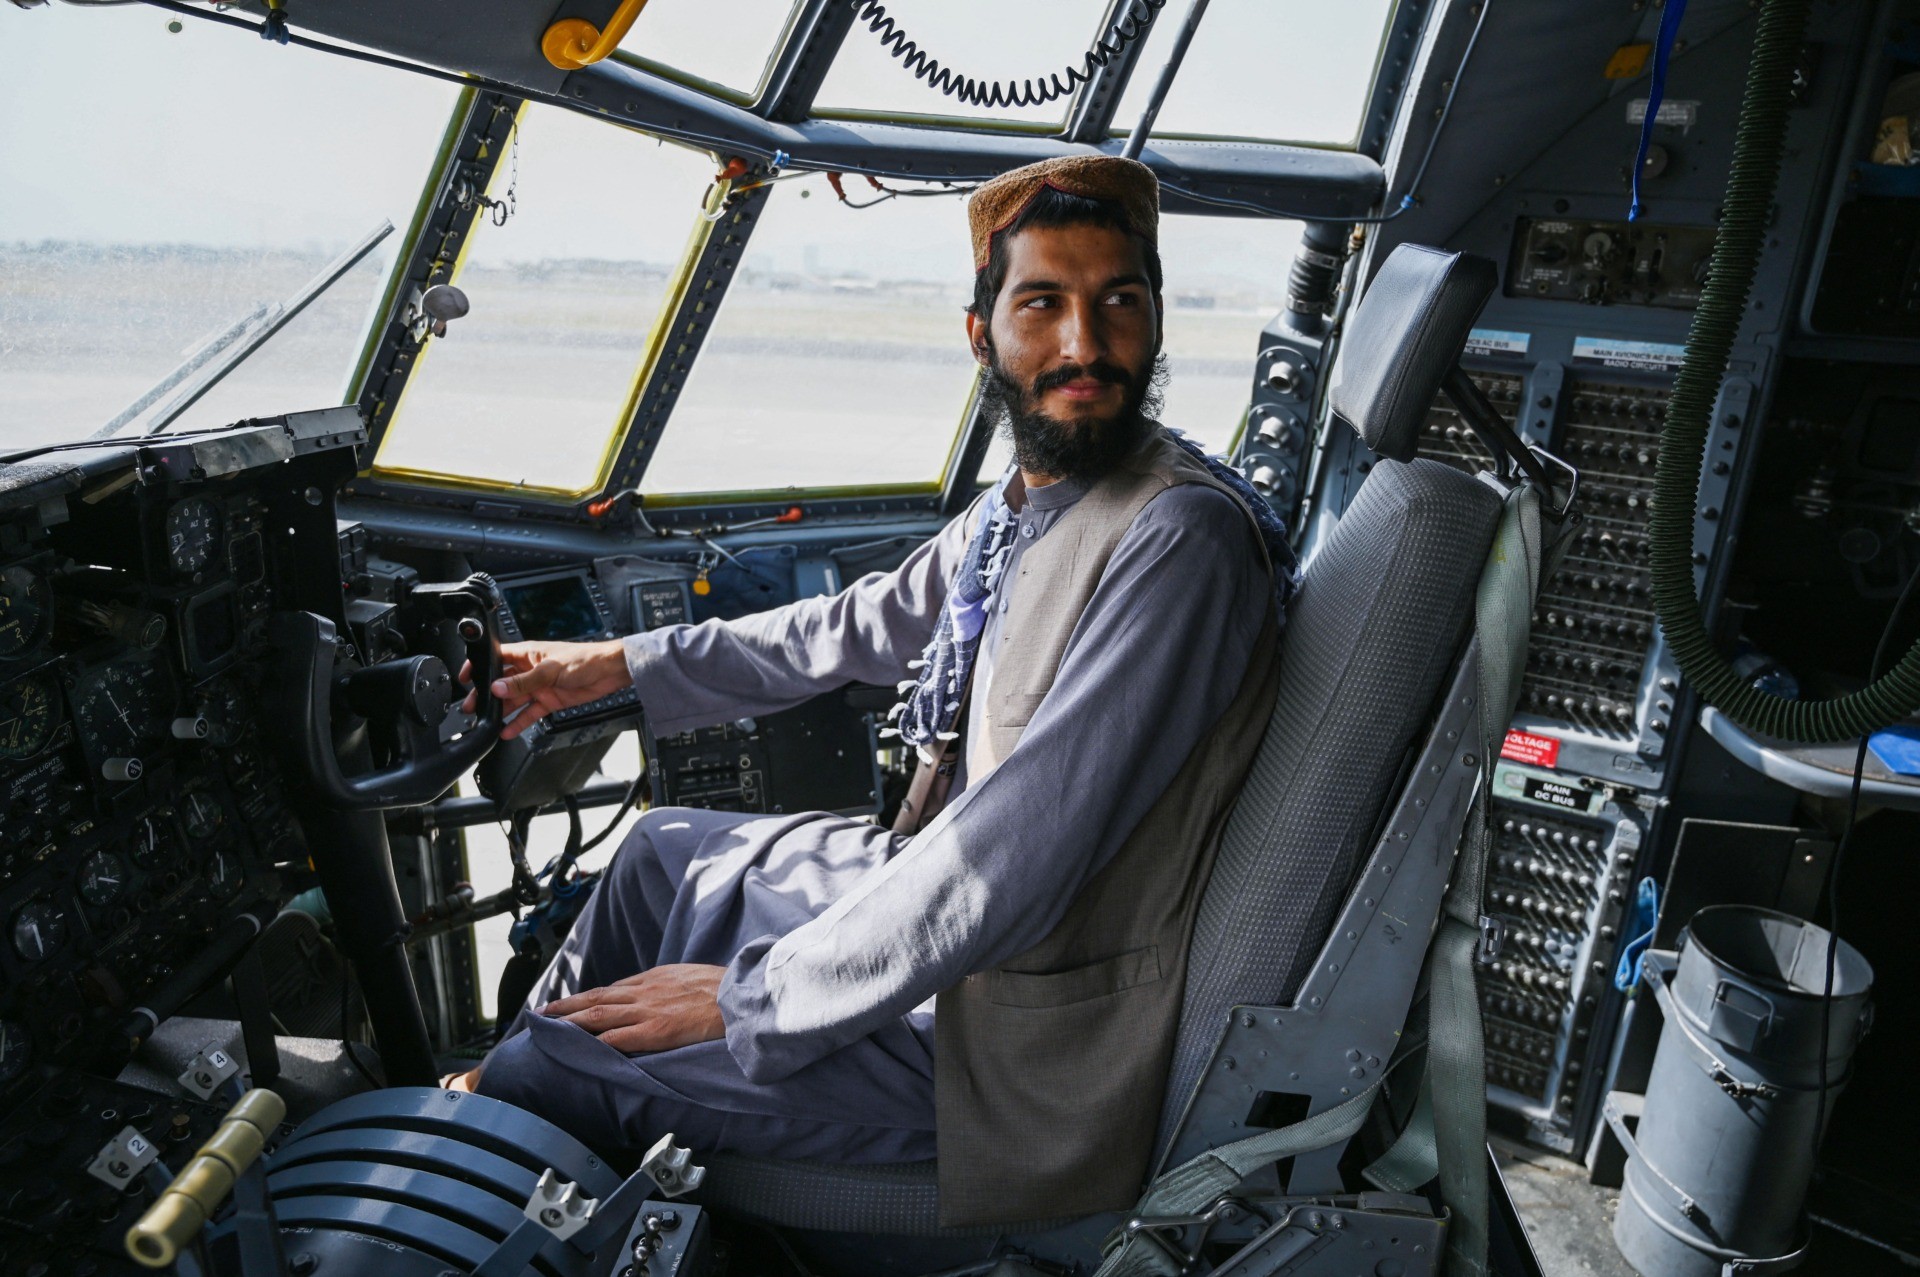 TOPSHOT - A Taliban fighter sits in the cockpit of an Afghan Air Force aircraft at the airport in Kabul on August 31, 2021, after the US has pulled all its troops out of the country to end a brutal 20-year war -- one that started and ended with the hardline Islamist in power. (Photo by Wakil KOHSAR / AFP) (Photo by WAKIL KOHSAR/AFP via Getty Images)